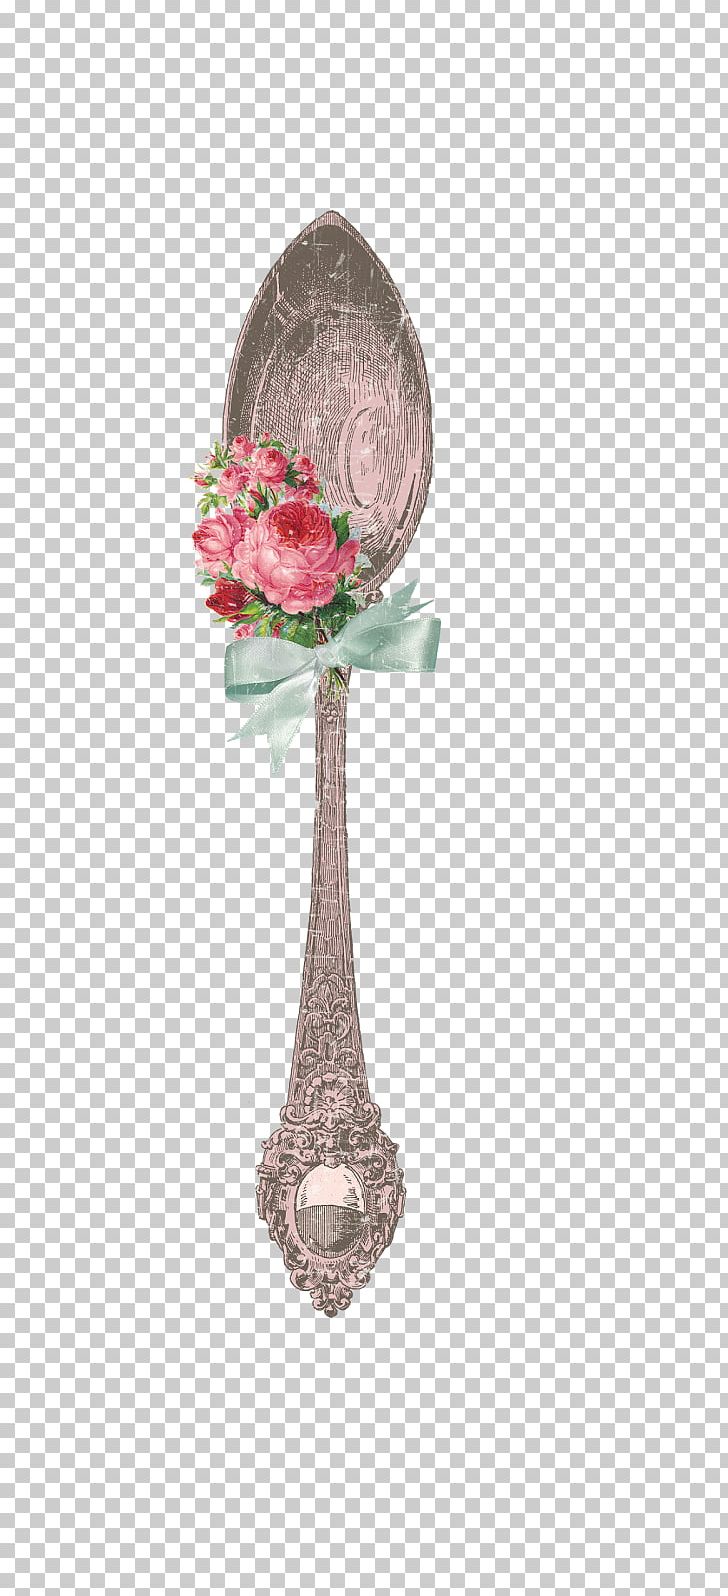 Spoon Kitchen Shabby Chic PNG, Clipart, Clothes Hanger, Cutlery, Demitasse Spoon, Download, Flower Free PNG Download